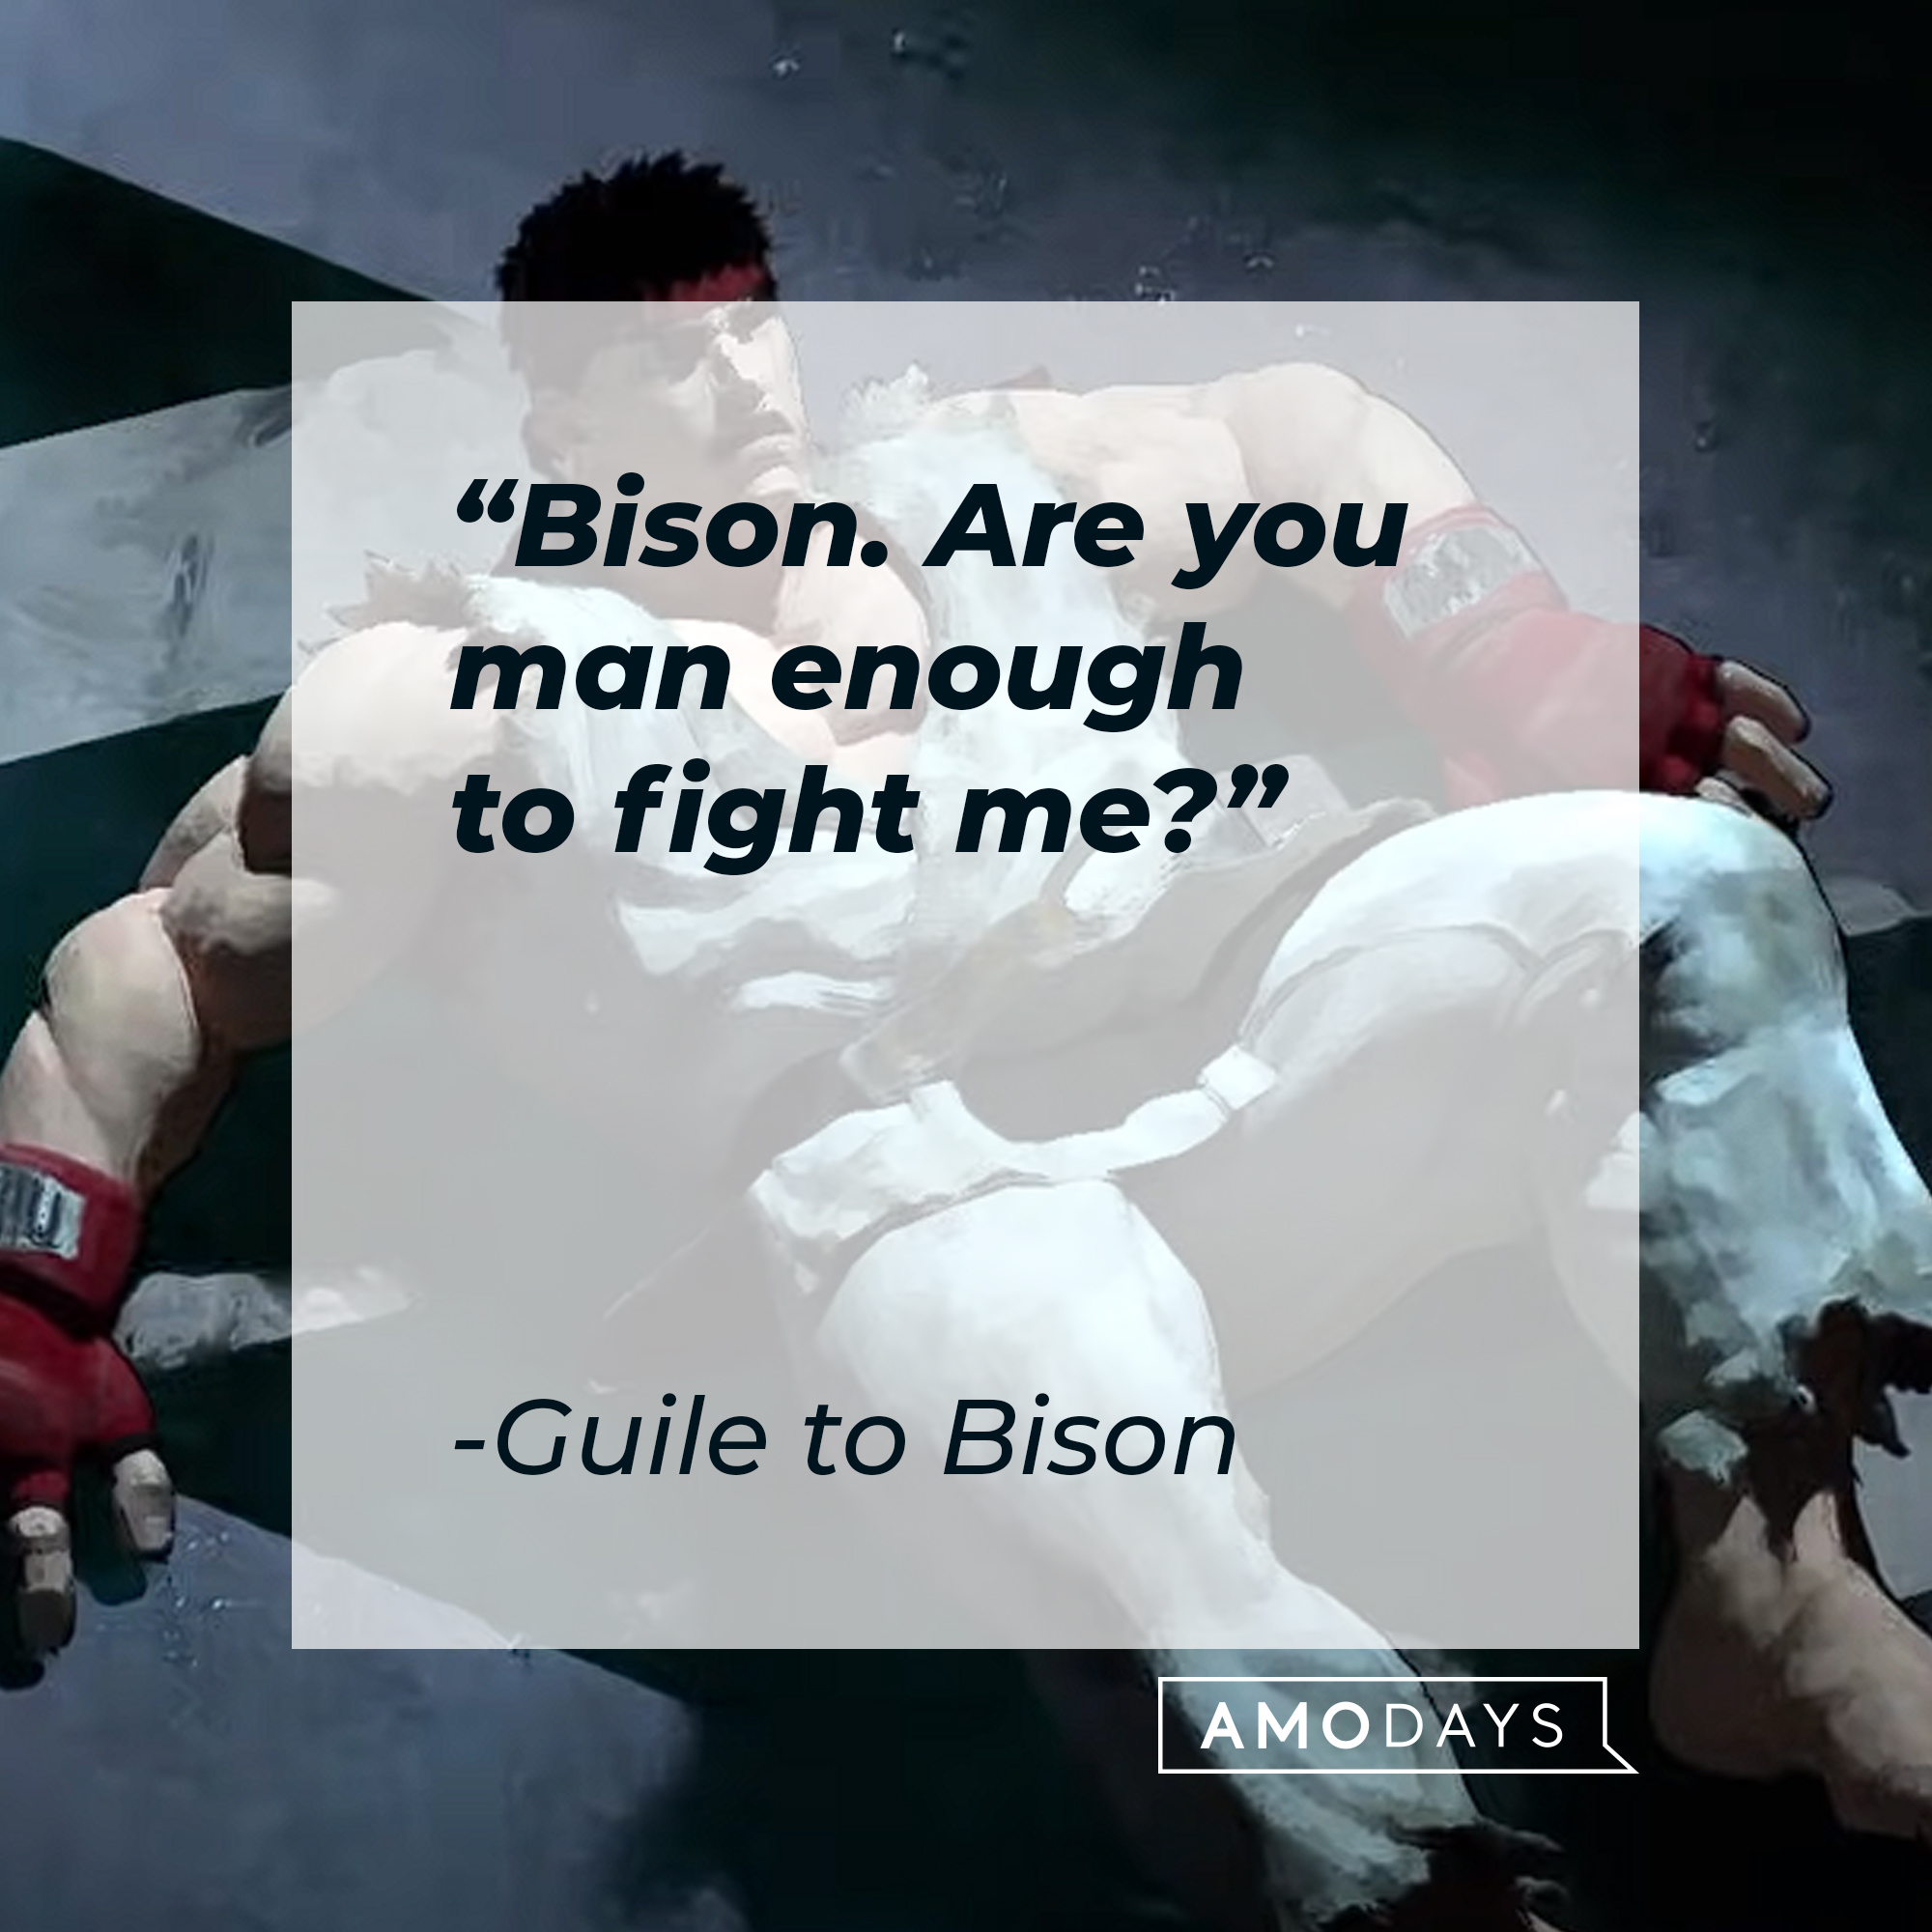 A quote from Guile to Bison: "Bison. Are you man enough to fight me?" | Source: youtube.com/PlayStation